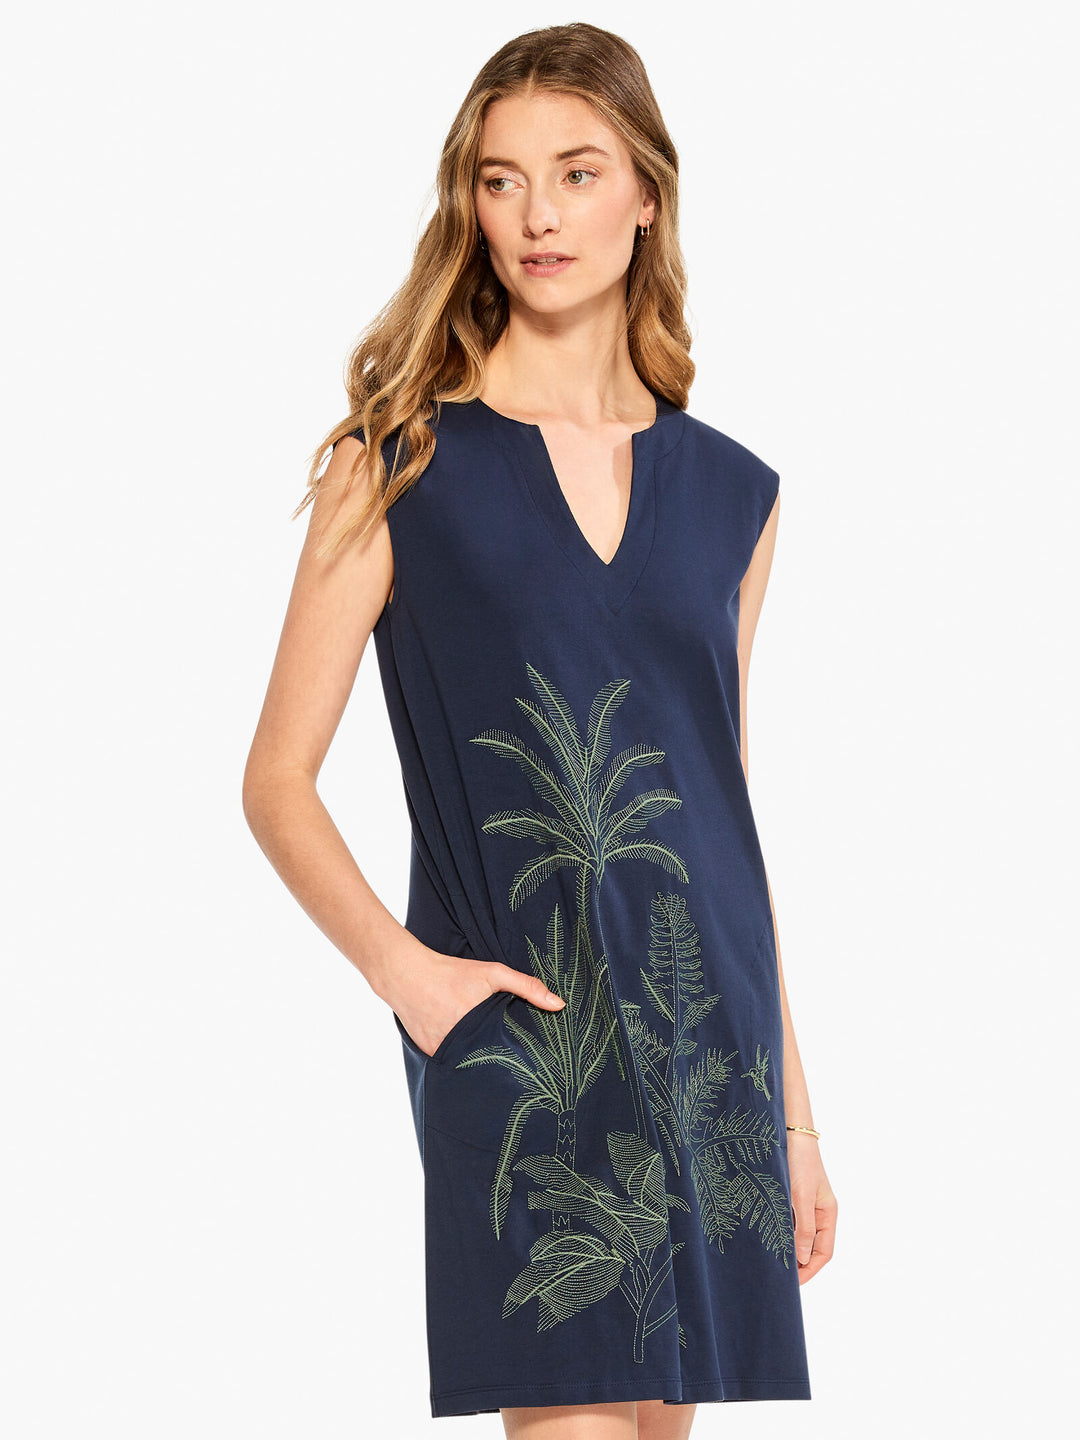 Embroidered Palm Dress